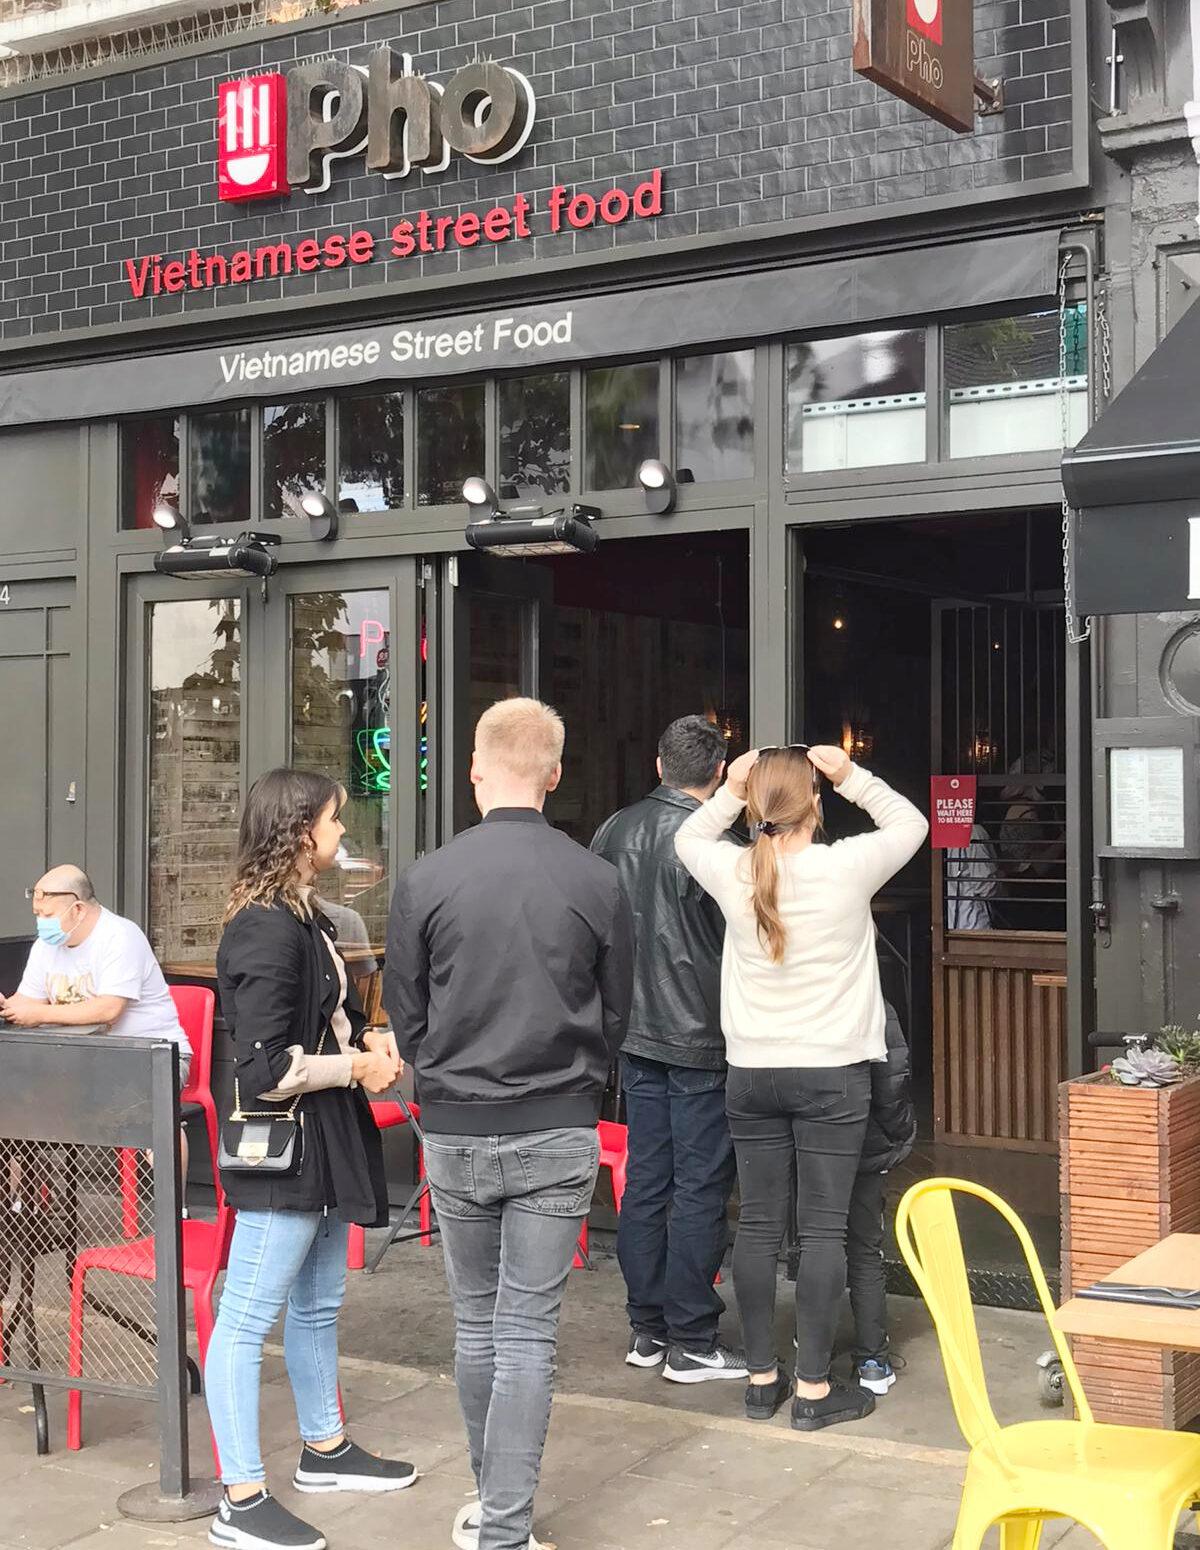 Customers queuing outside a restaurant on the last day of the "Eat Out to Help Out" scheme, which pays for half of their restaurant bills, in London, on Aug. 31, 2020. (Sharon Hsu/The Epoch Times)